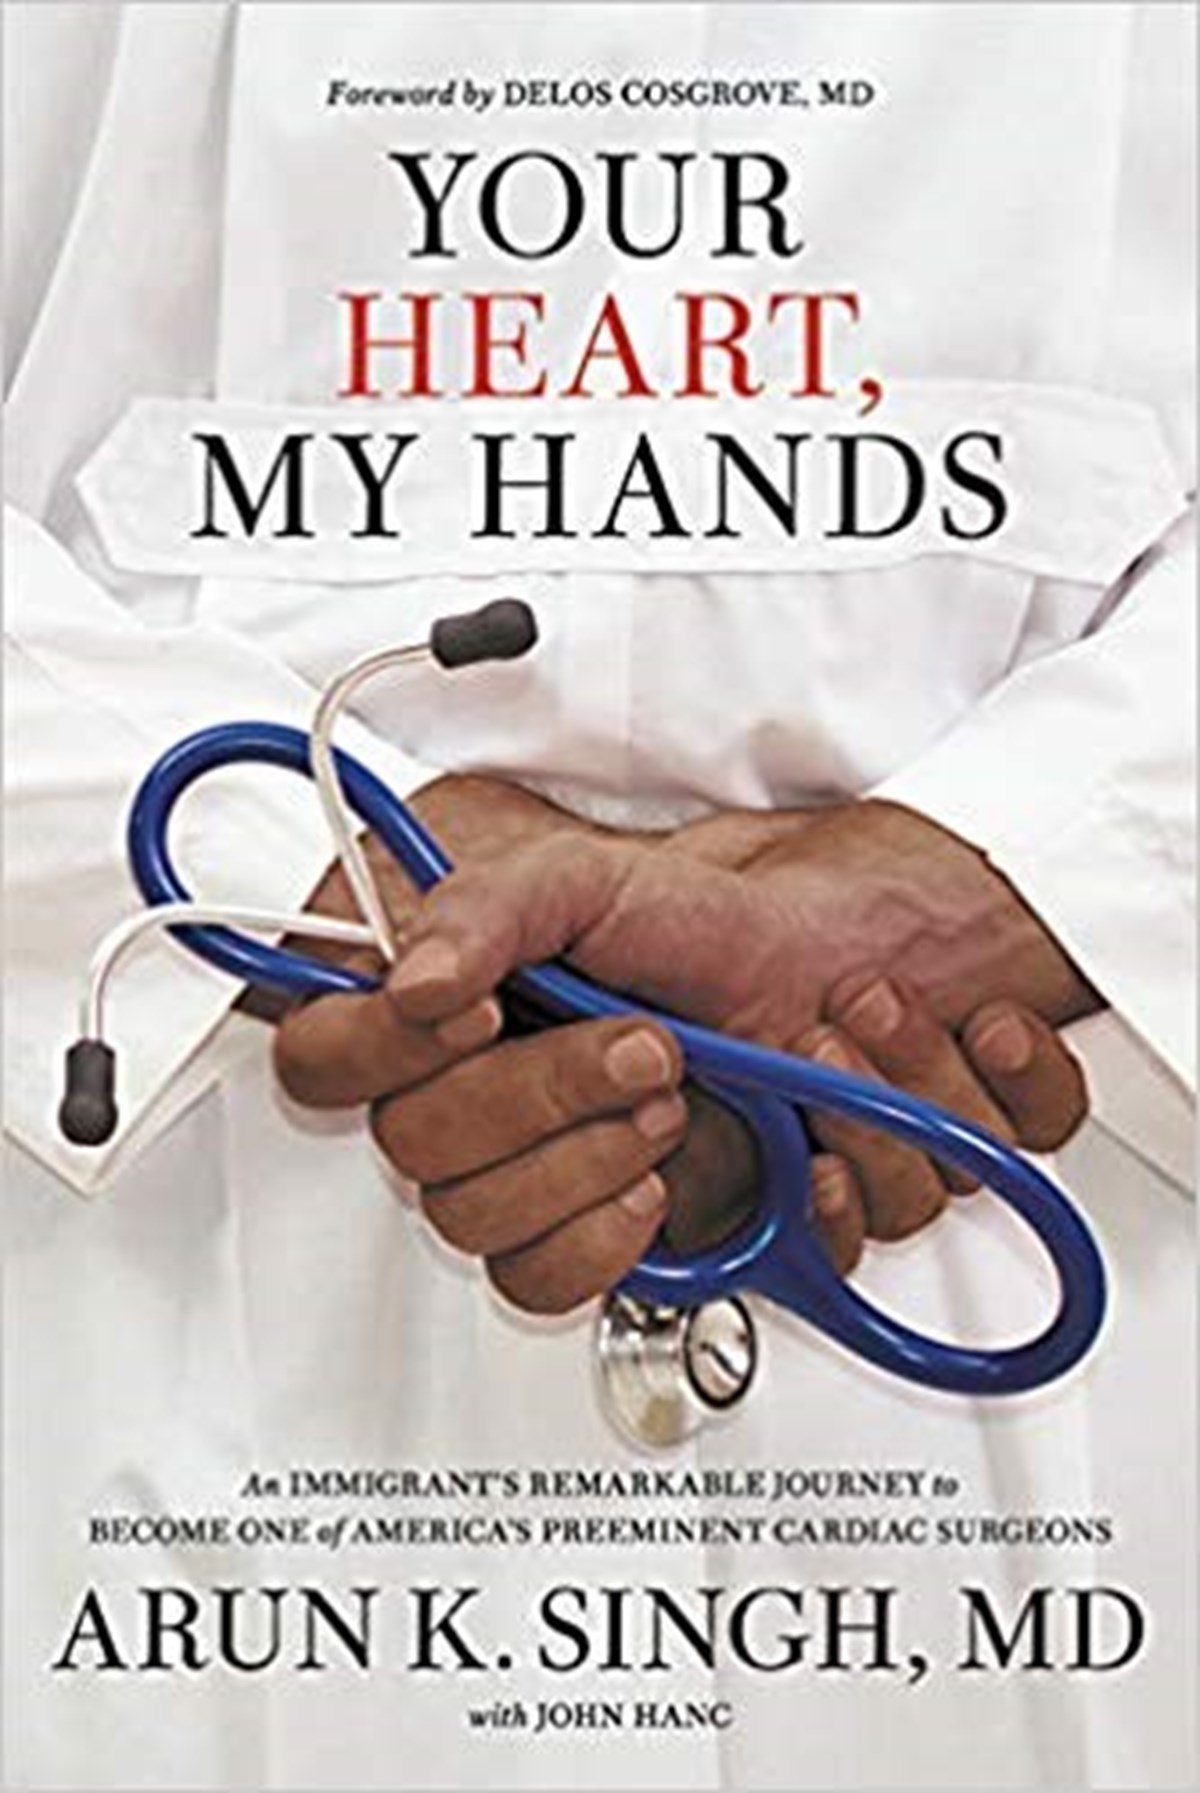 Dr. Arun Singh to sign book at South County Hospital